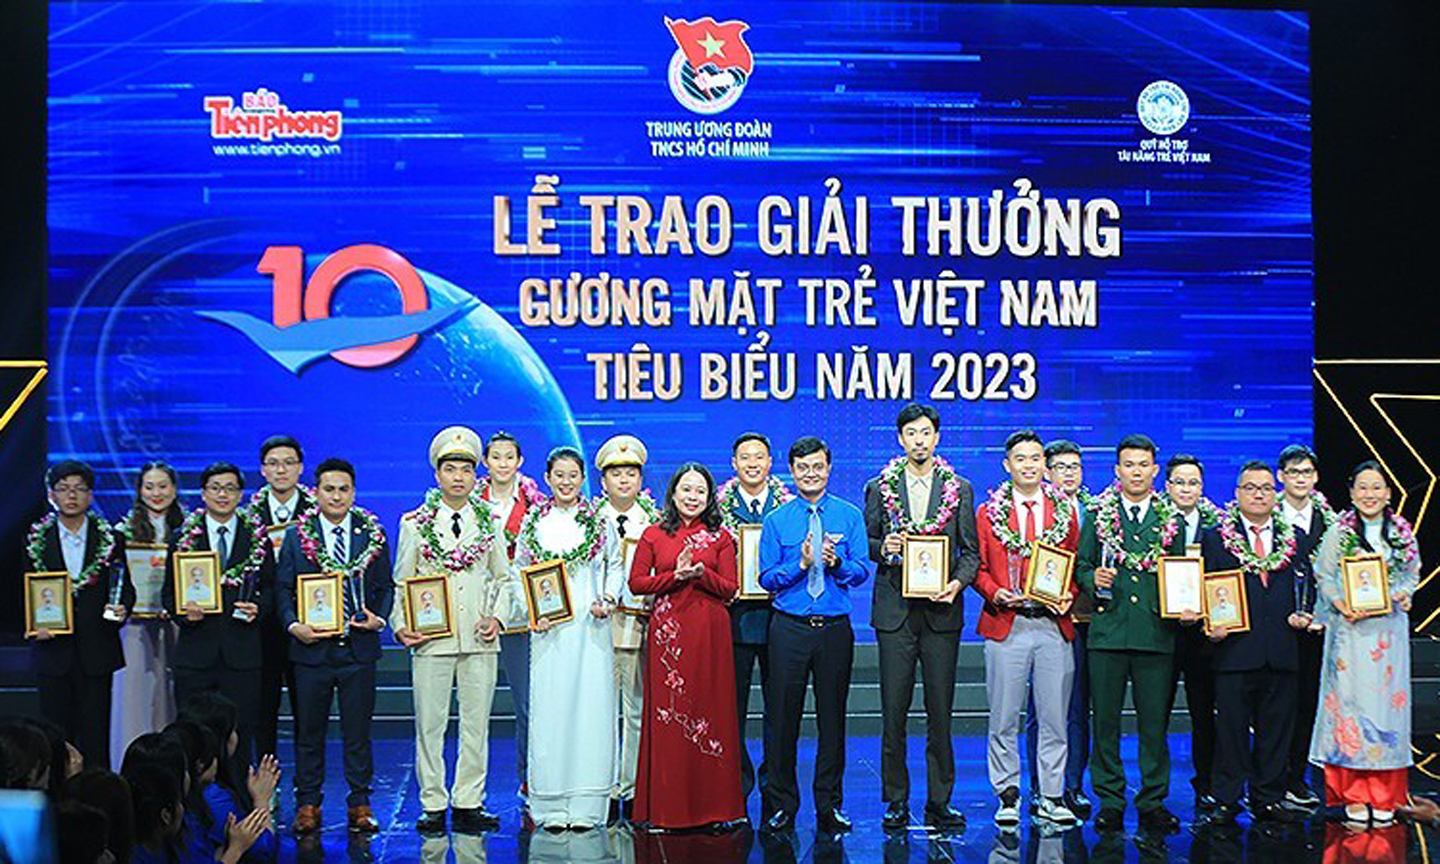 ABO/NDO- The Ho Chi Minh Communist Youth Union (HCYU) Central Committee held a ceremony on March 23 to honour ten outstanding young faces of Vietnam.